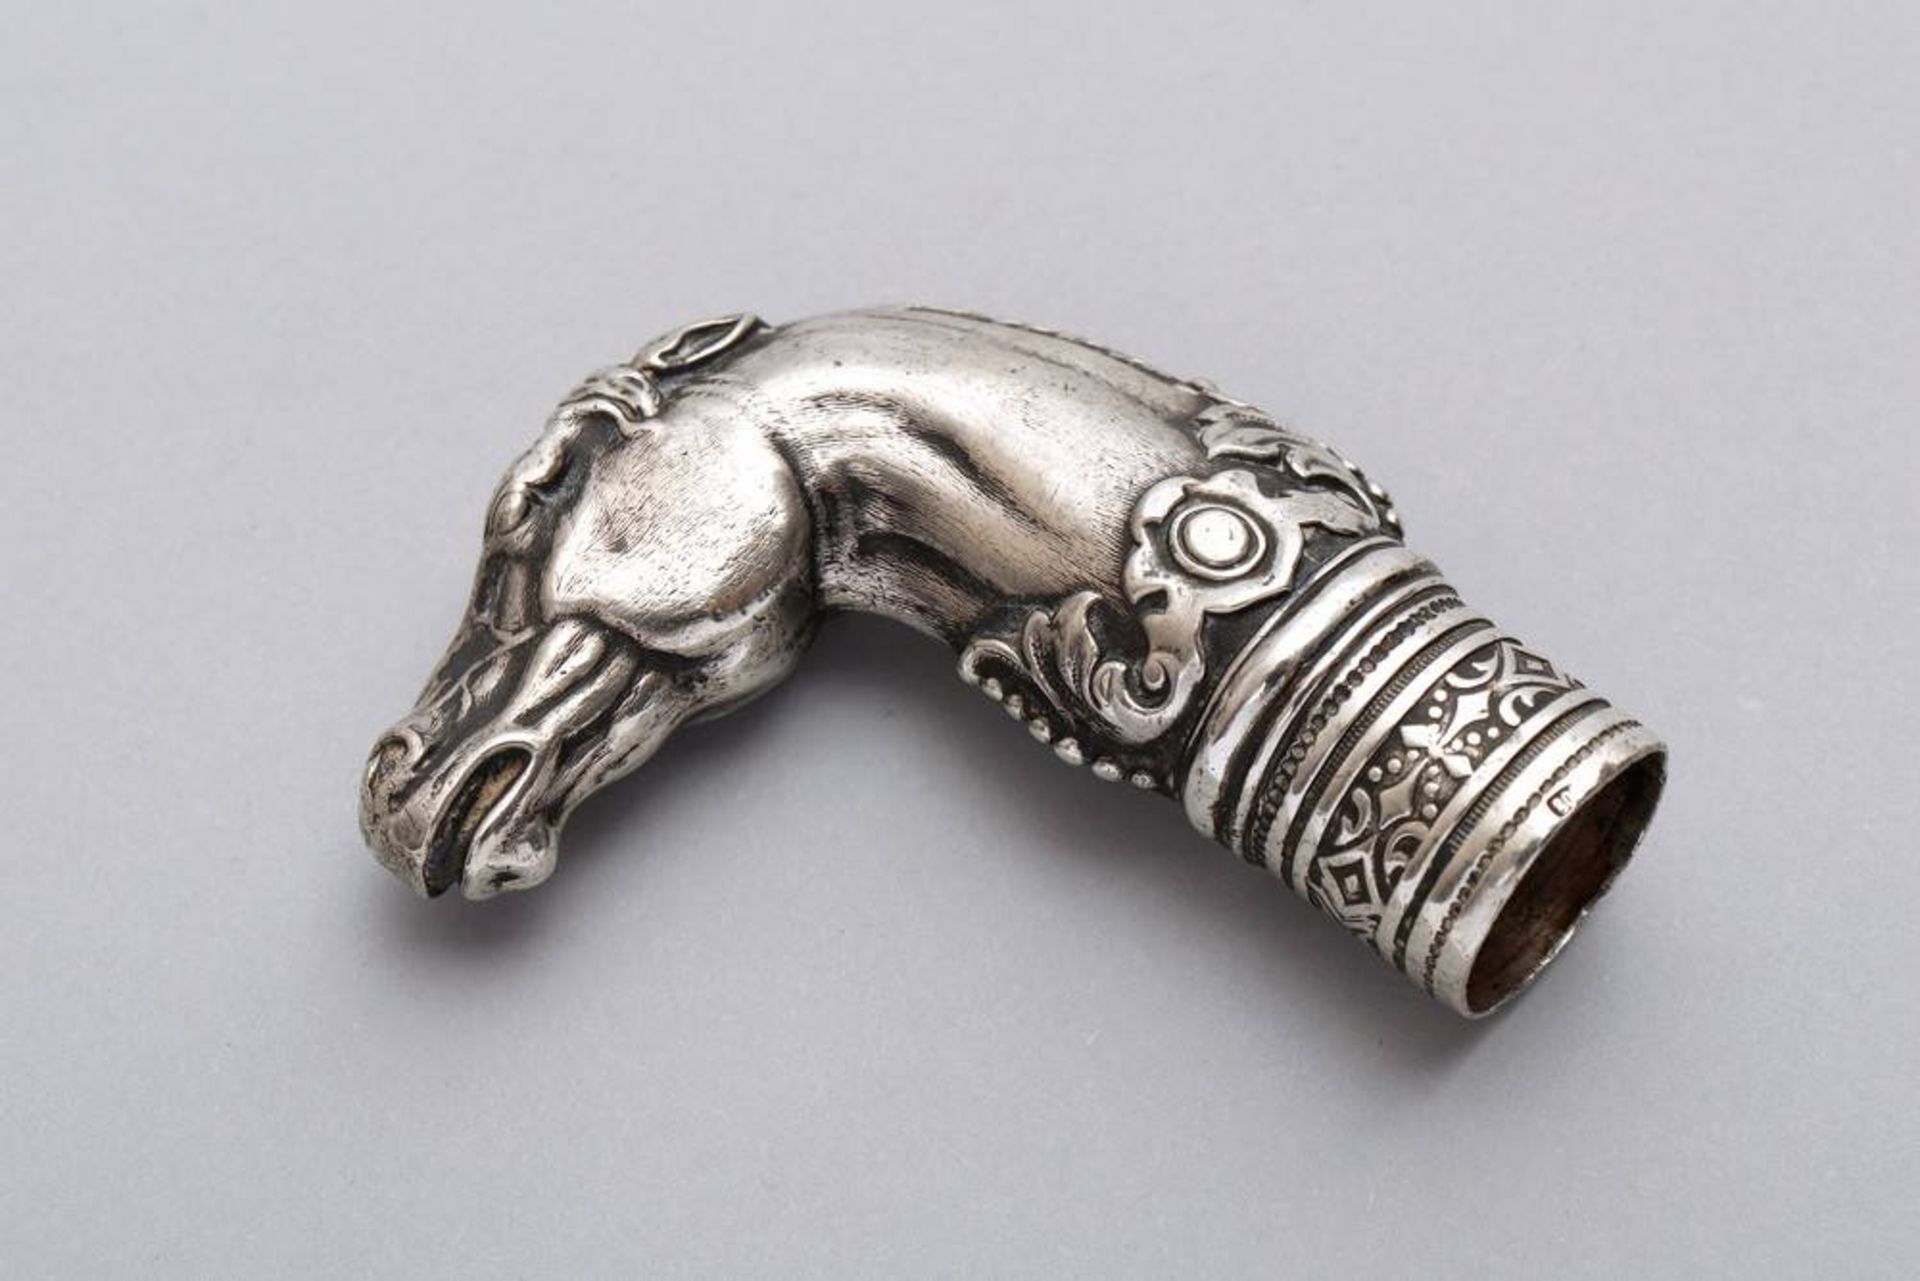 Cane handle silver, possibly german, ca. 1900, horse head, ca. 37g (filled), H: 6,5cm, signs of